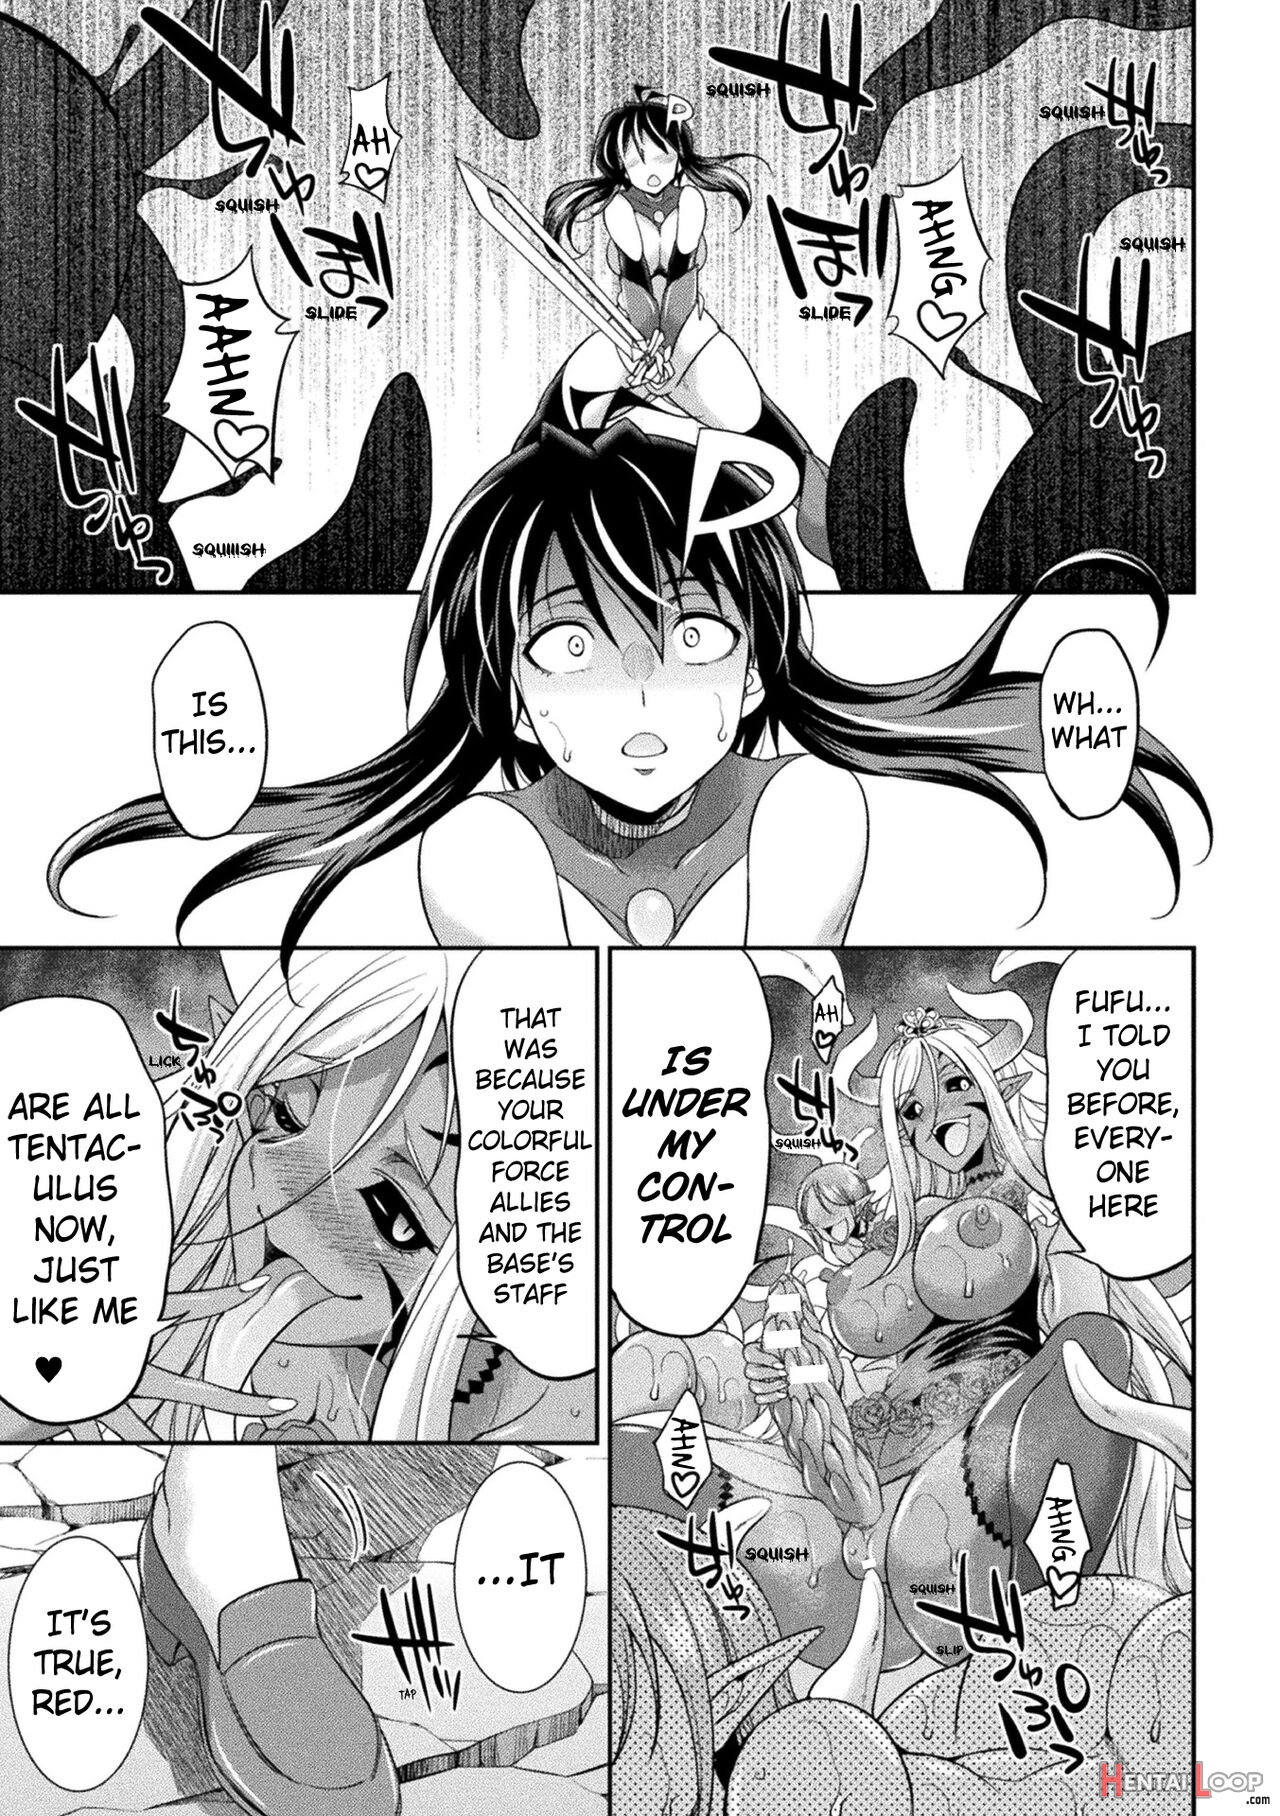 Special Duty Squadron Colorful Force Heroines Of Justice Vs The Tentacle Queen! The Great Battle Of Futa Training!? page 145